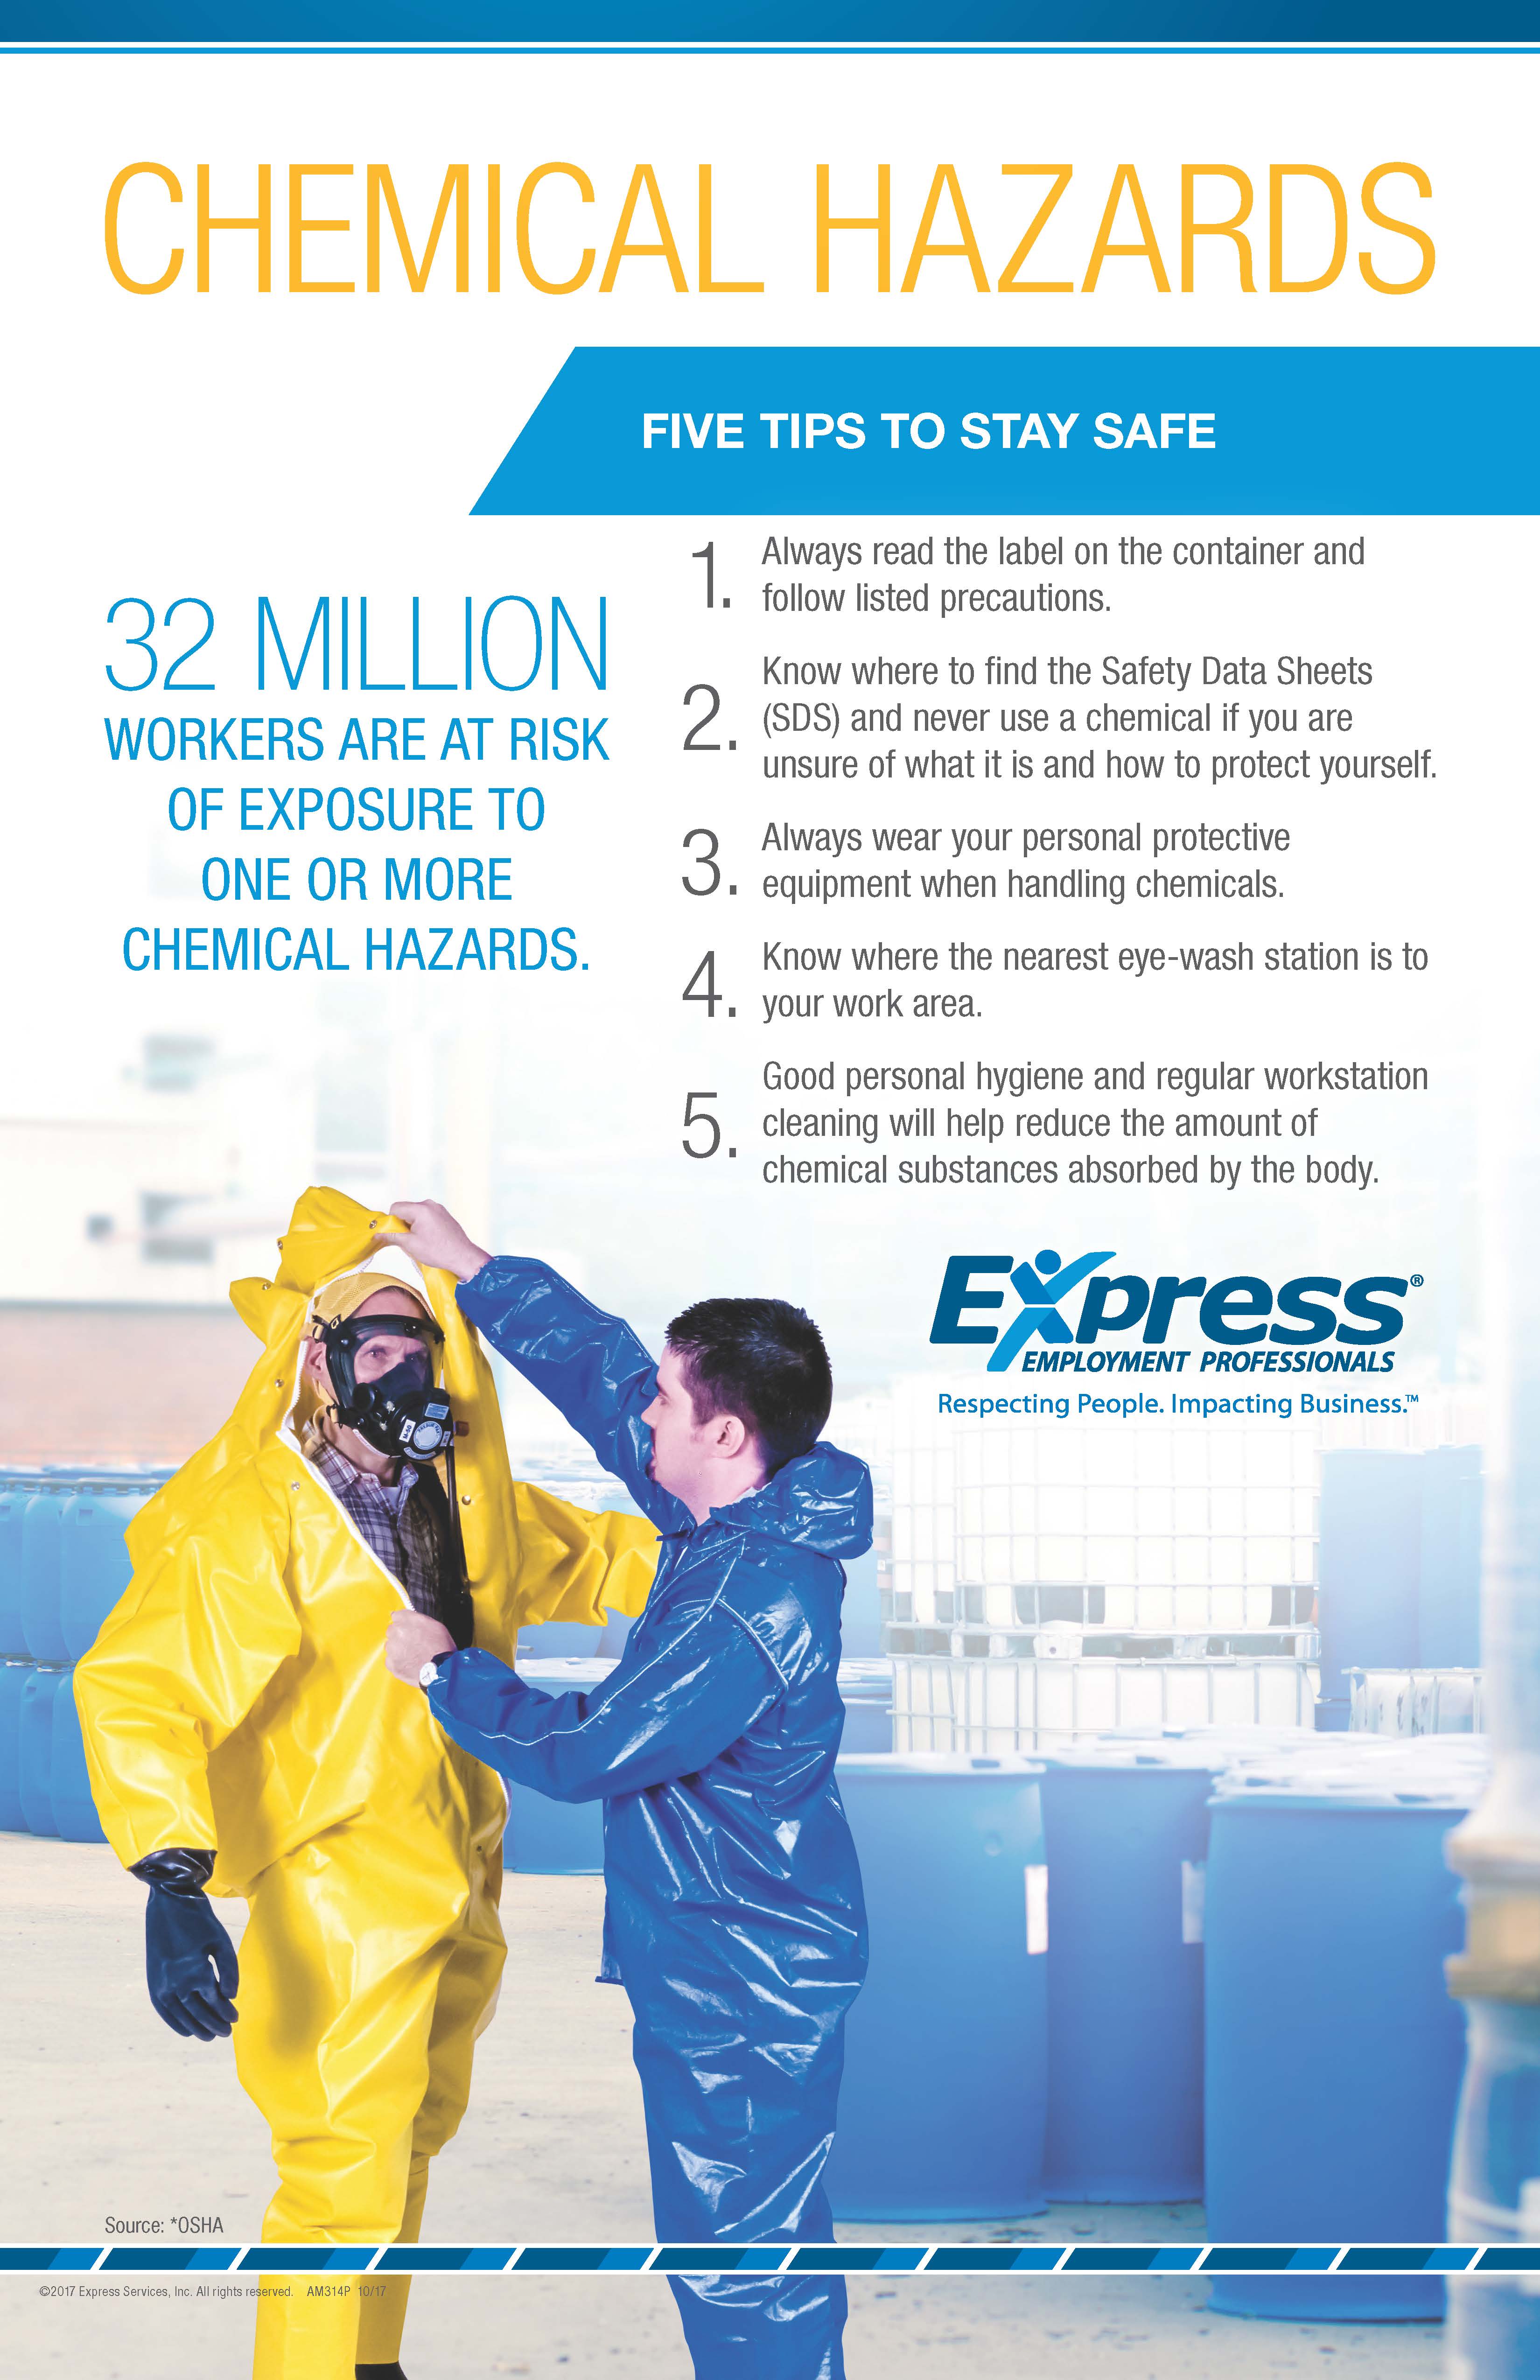 Focus on Safety: Five Tips to Stay Safe from Chemical Hazards | Refresh